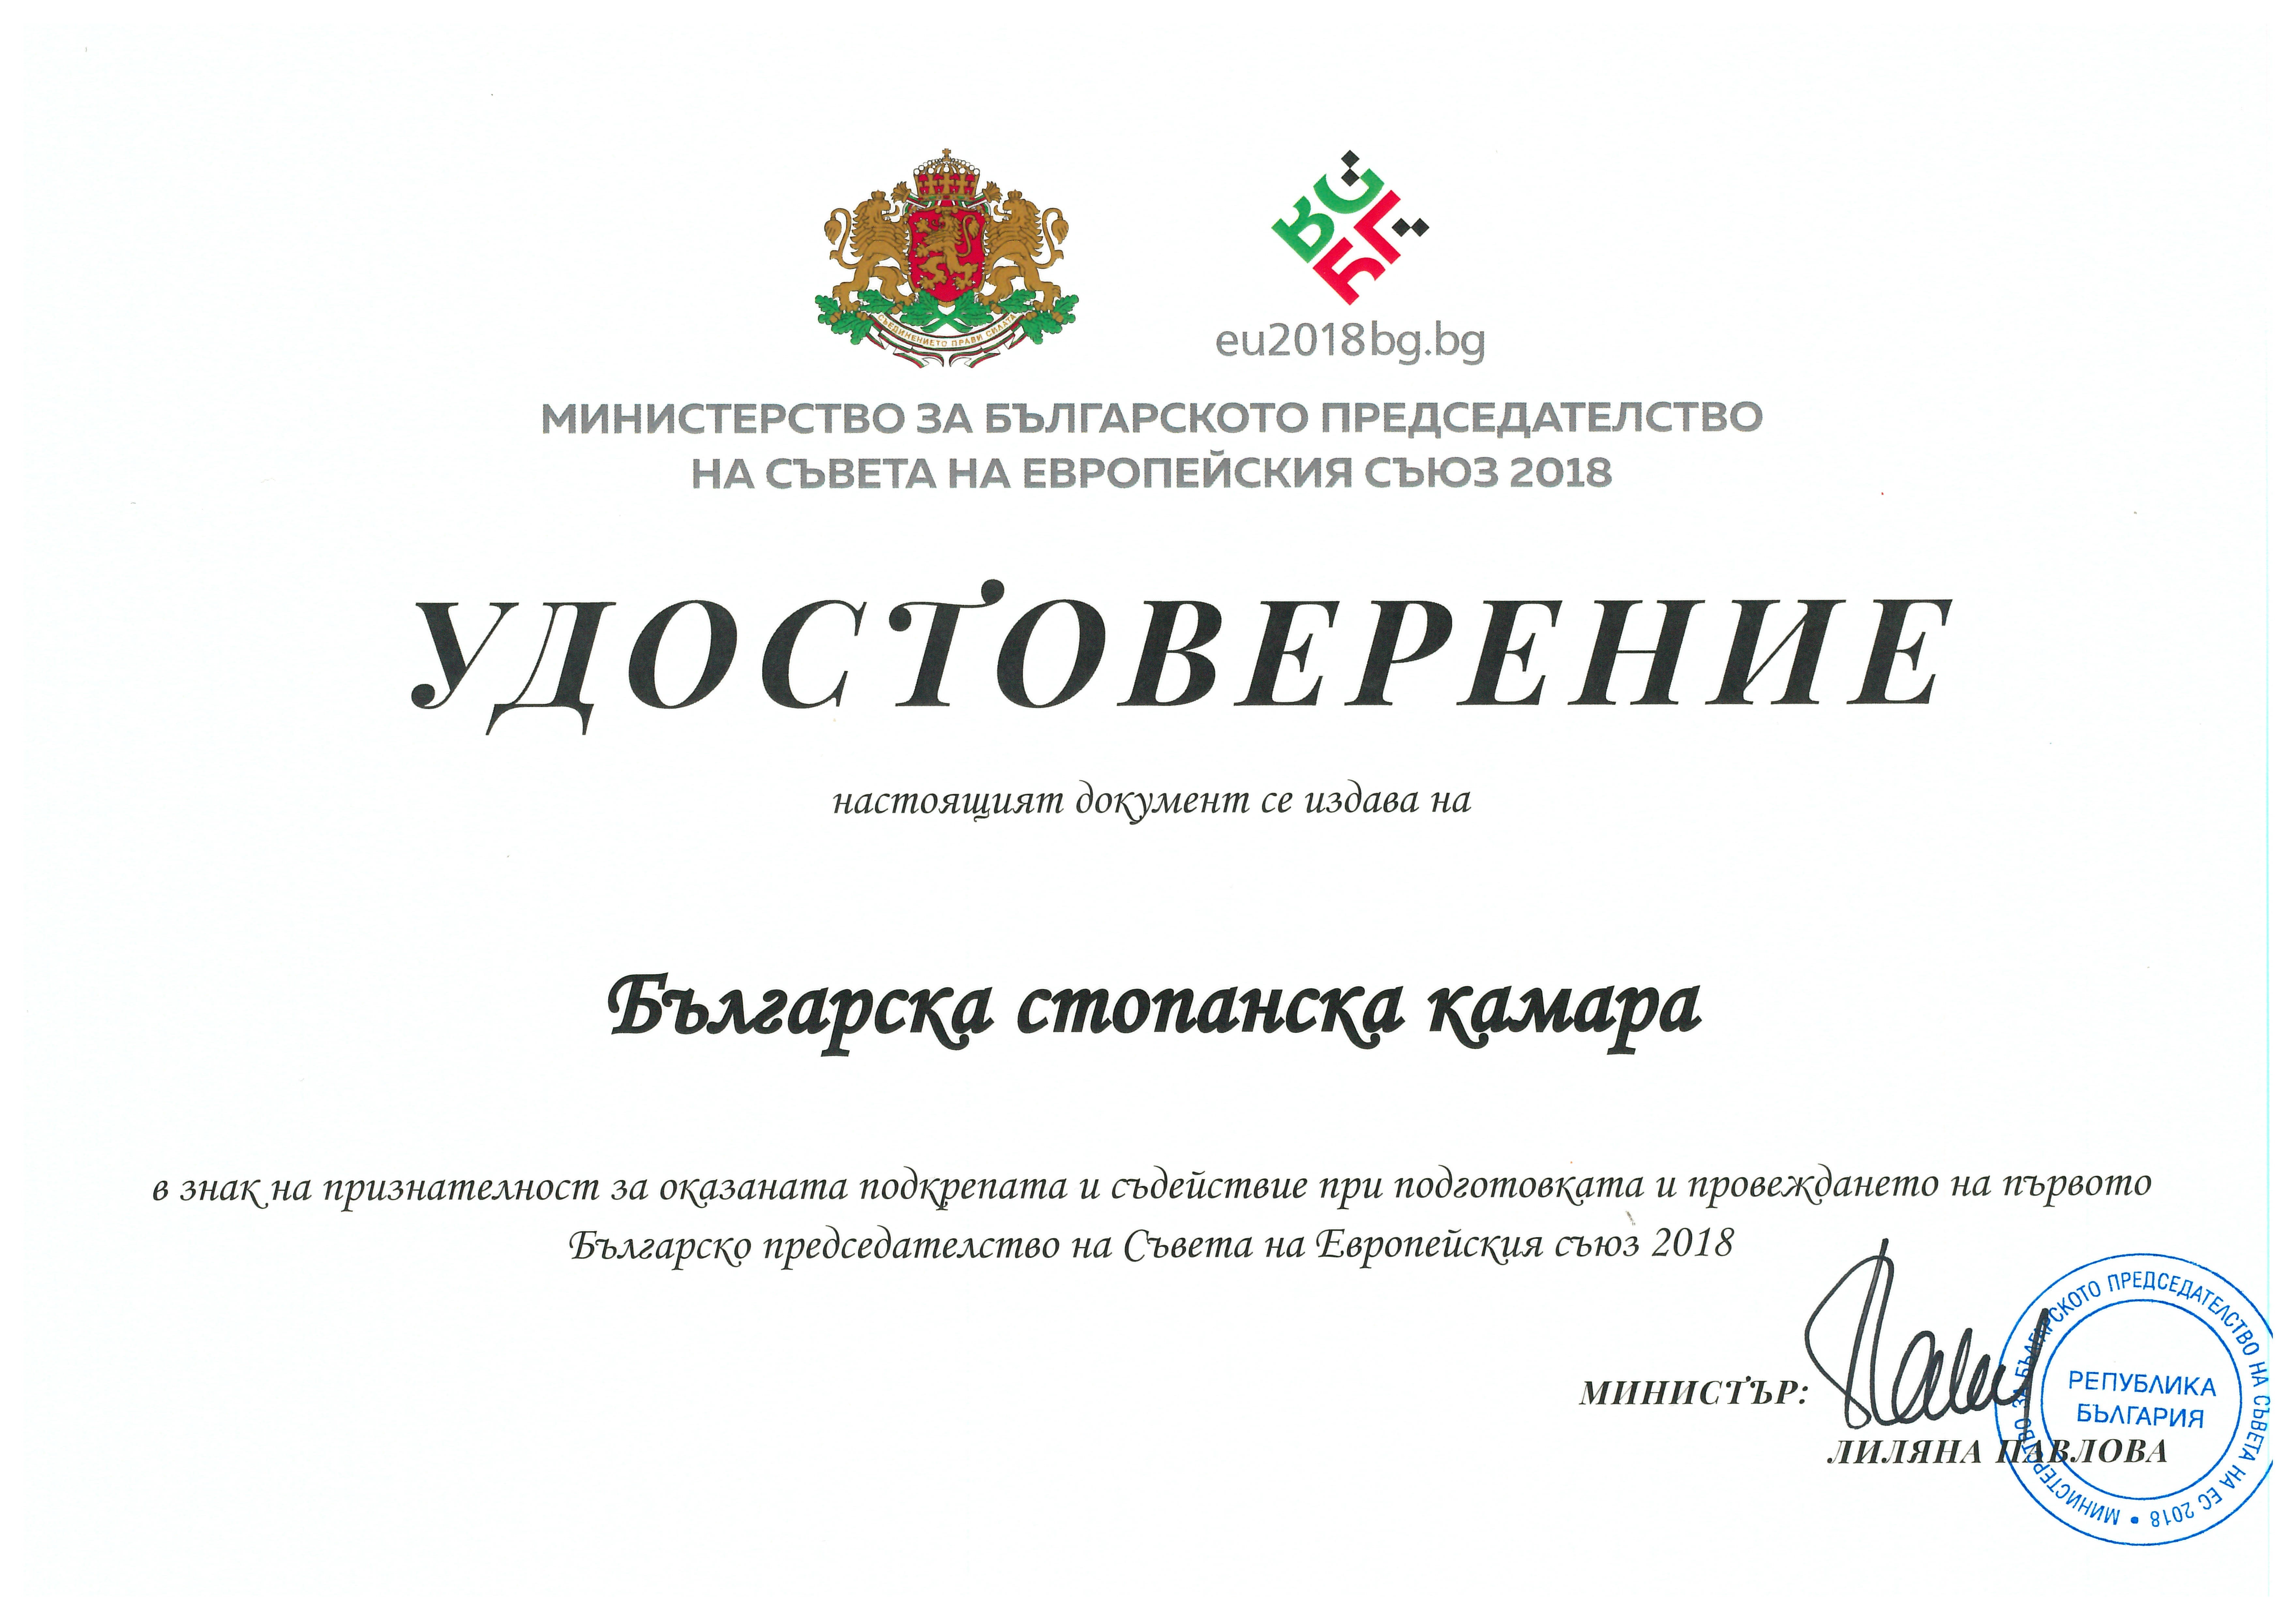 BIA has successfully accomplished its program during the Bulgarian Presidency